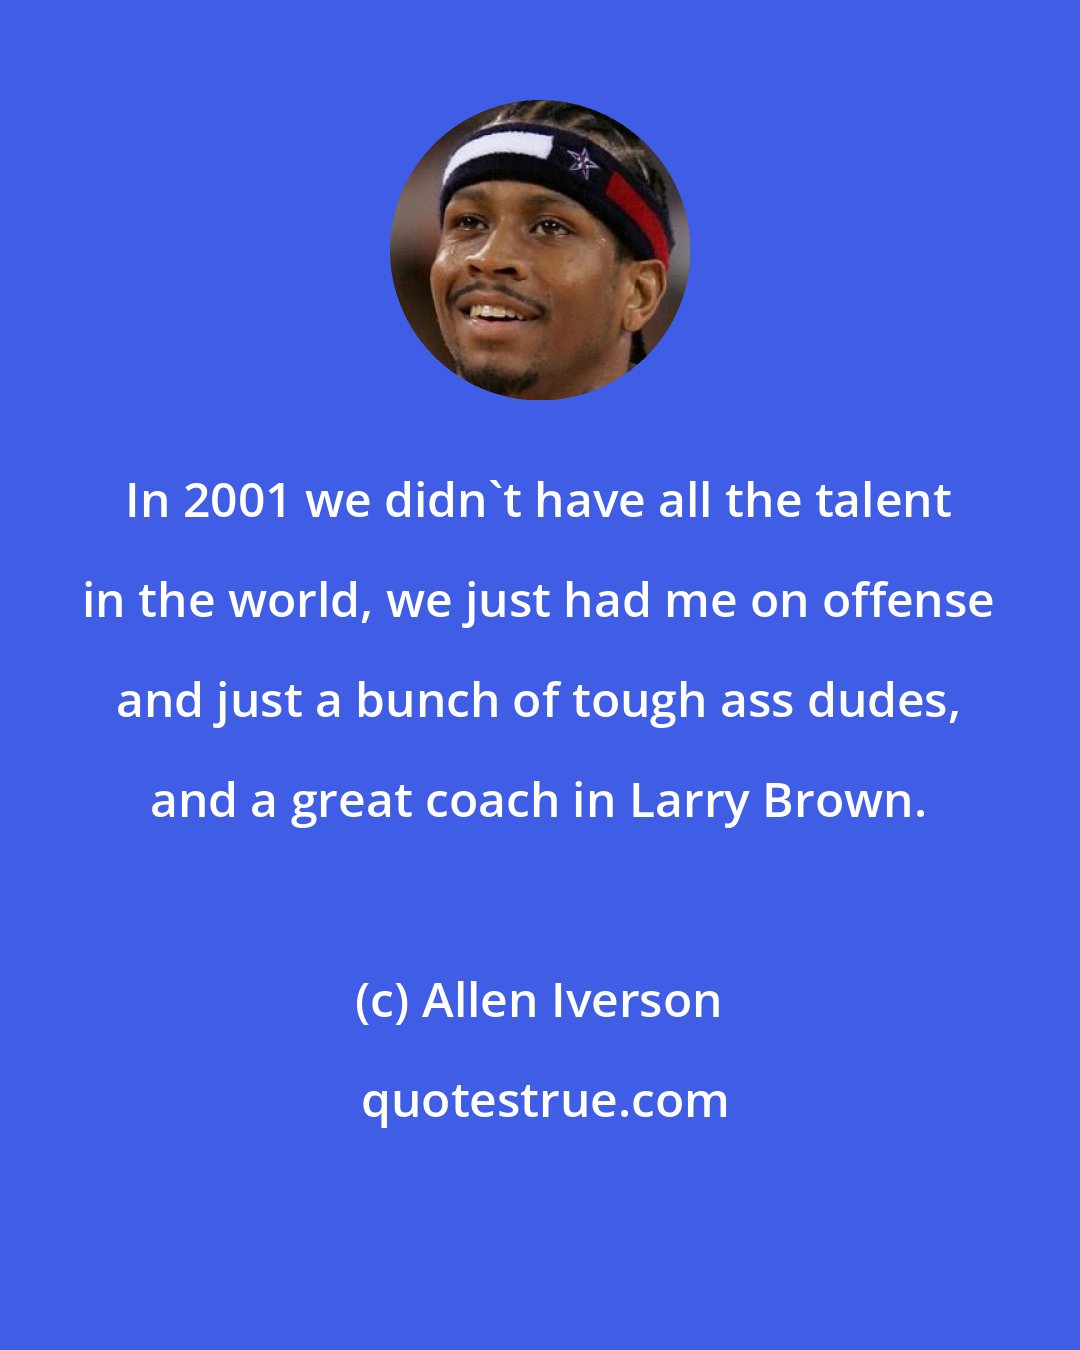 Allen Iverson: In 2001 we didn't have all the talent in the world, we just had me on offense and just a bunch of tough ass dudes, and a great coach in Larry Brown.